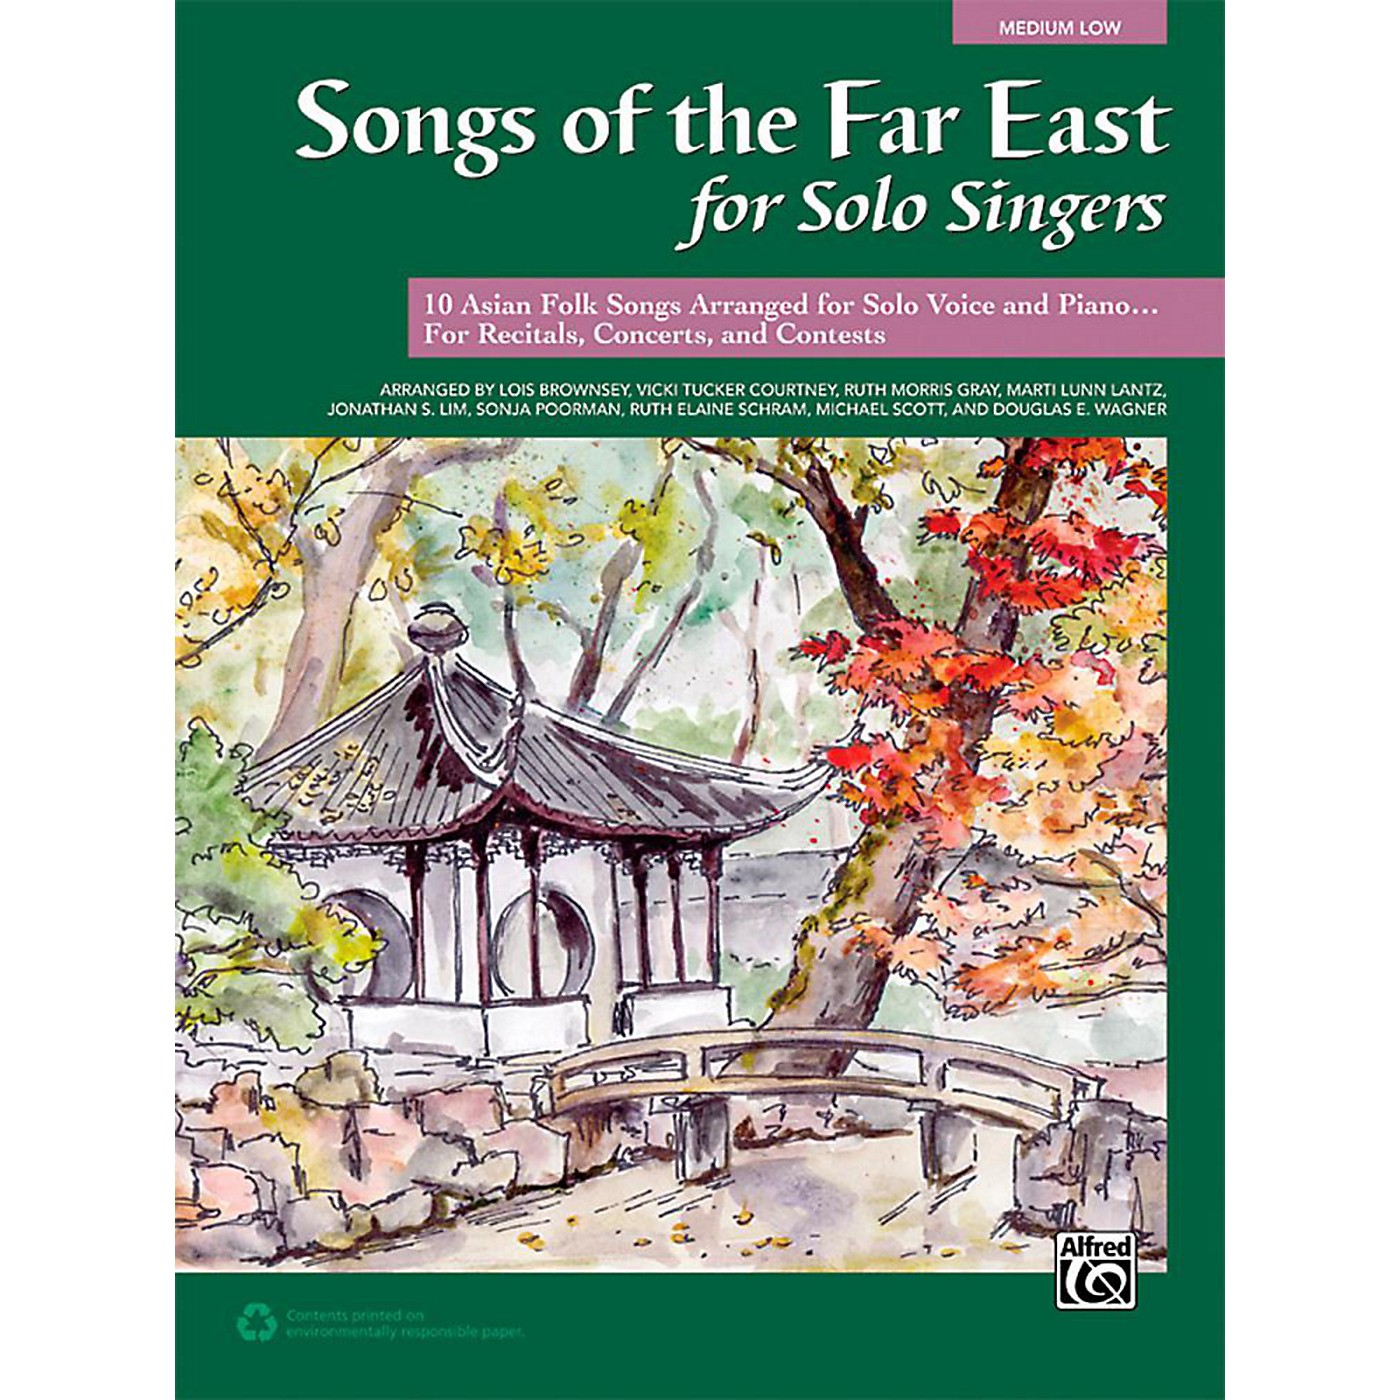 Alfred Songs of the Far East for Solo Singers Book Medium Low thumbnail